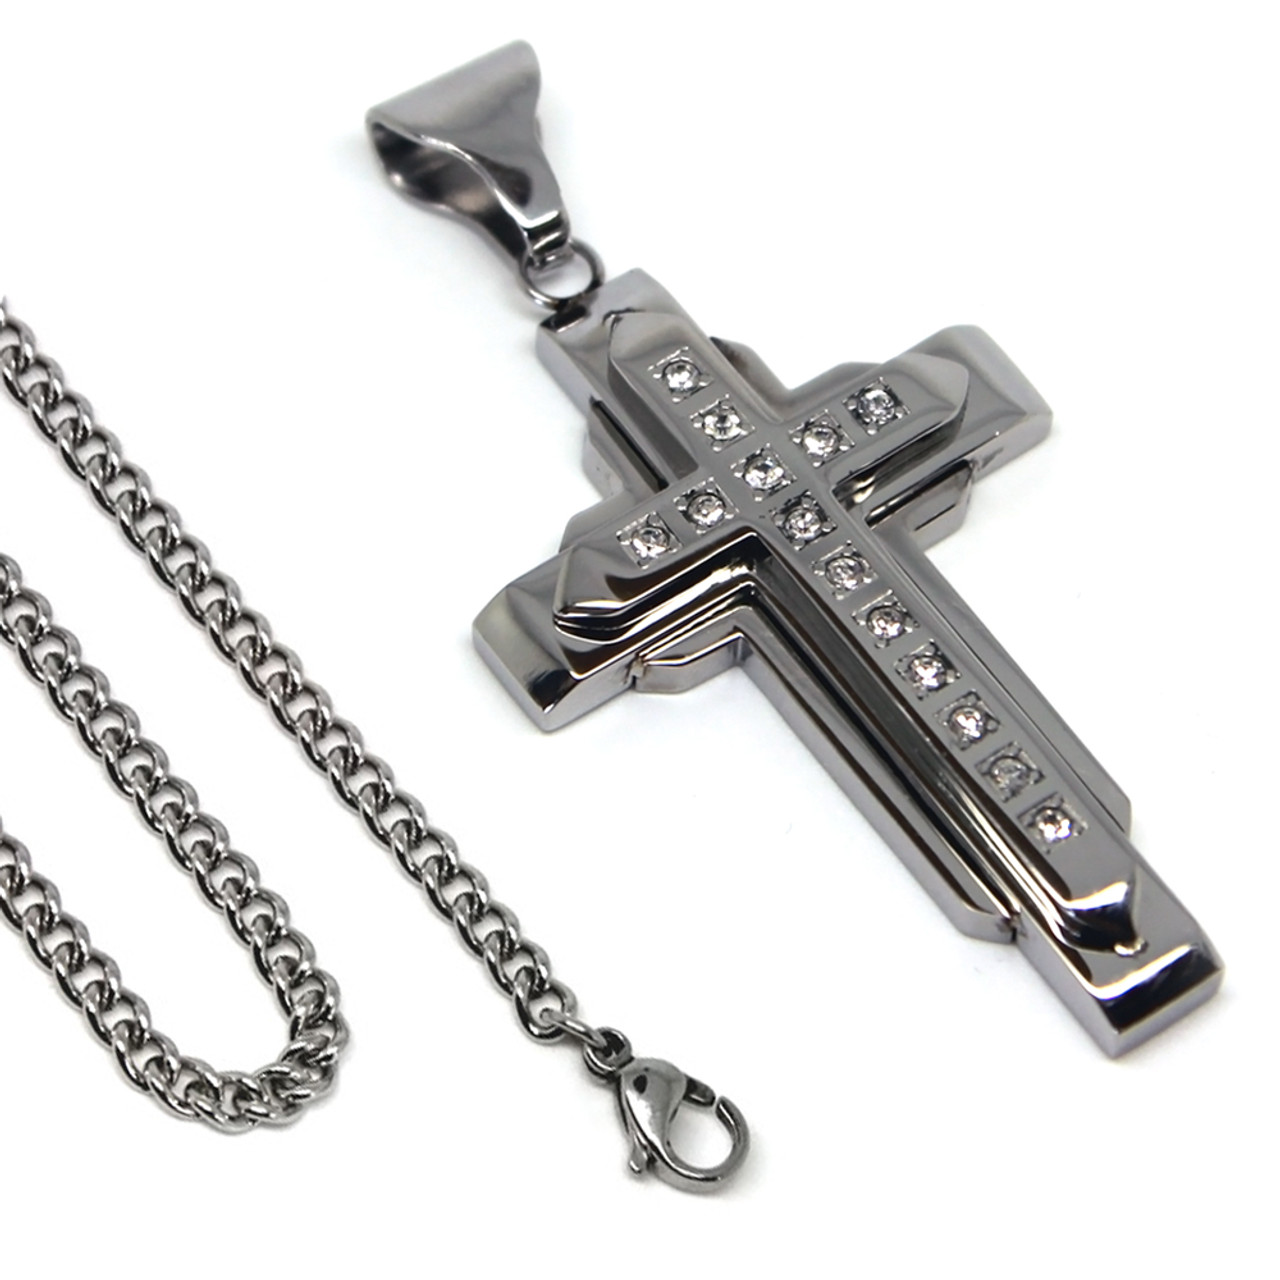 Stainless Steel Brushed Triple Layer Cross Religious 24 Chain Necklace  Pendant Charm: 31937624440901